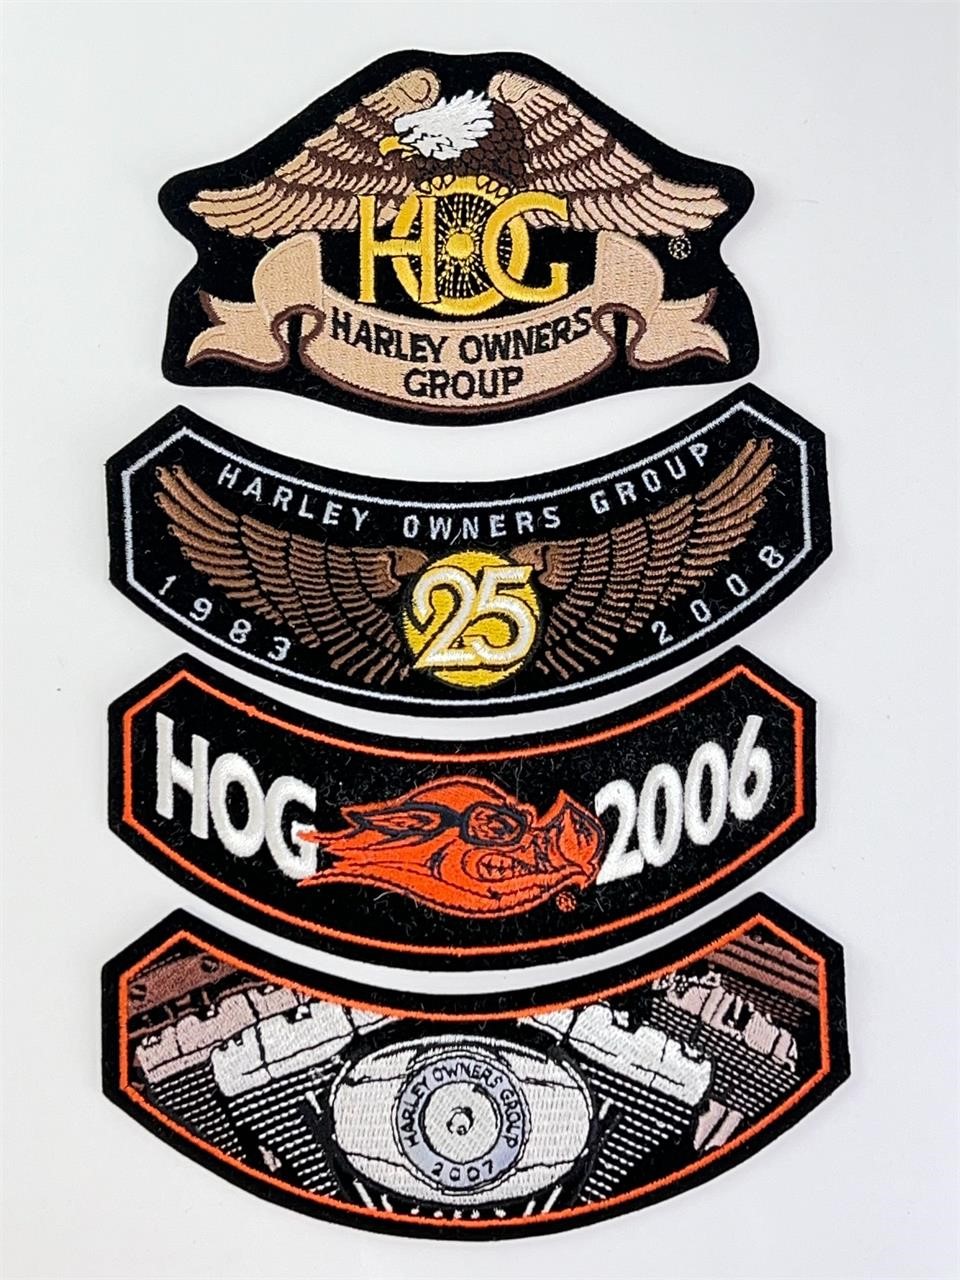 4 Never Used Vintage Harley Davidson Patches